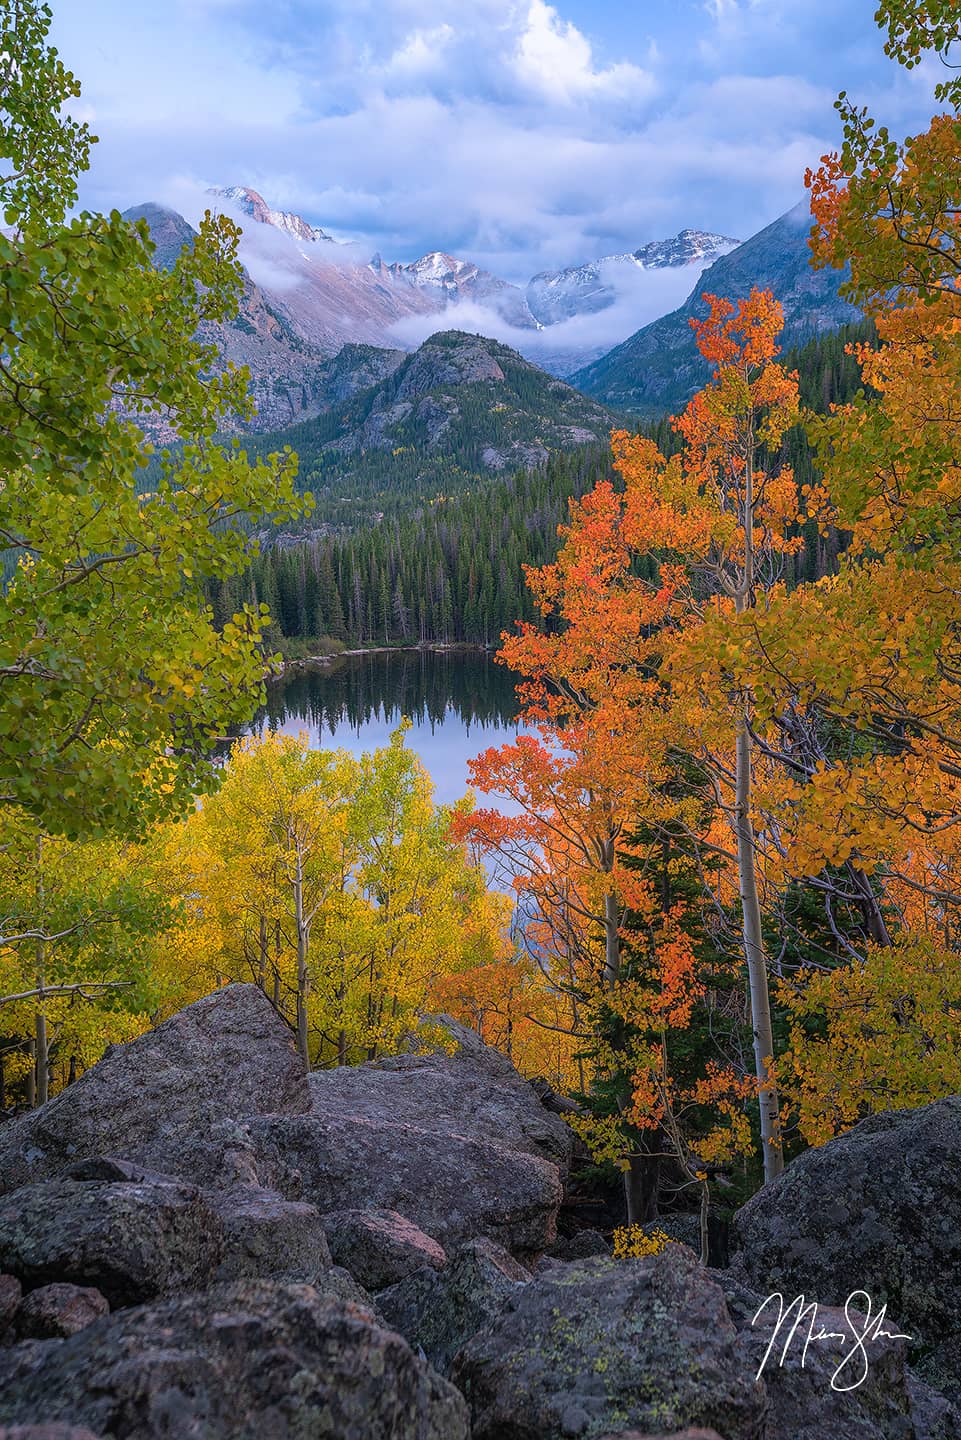 Rocky Mountain National Park's Bear Lake and Long's Peak in autumn